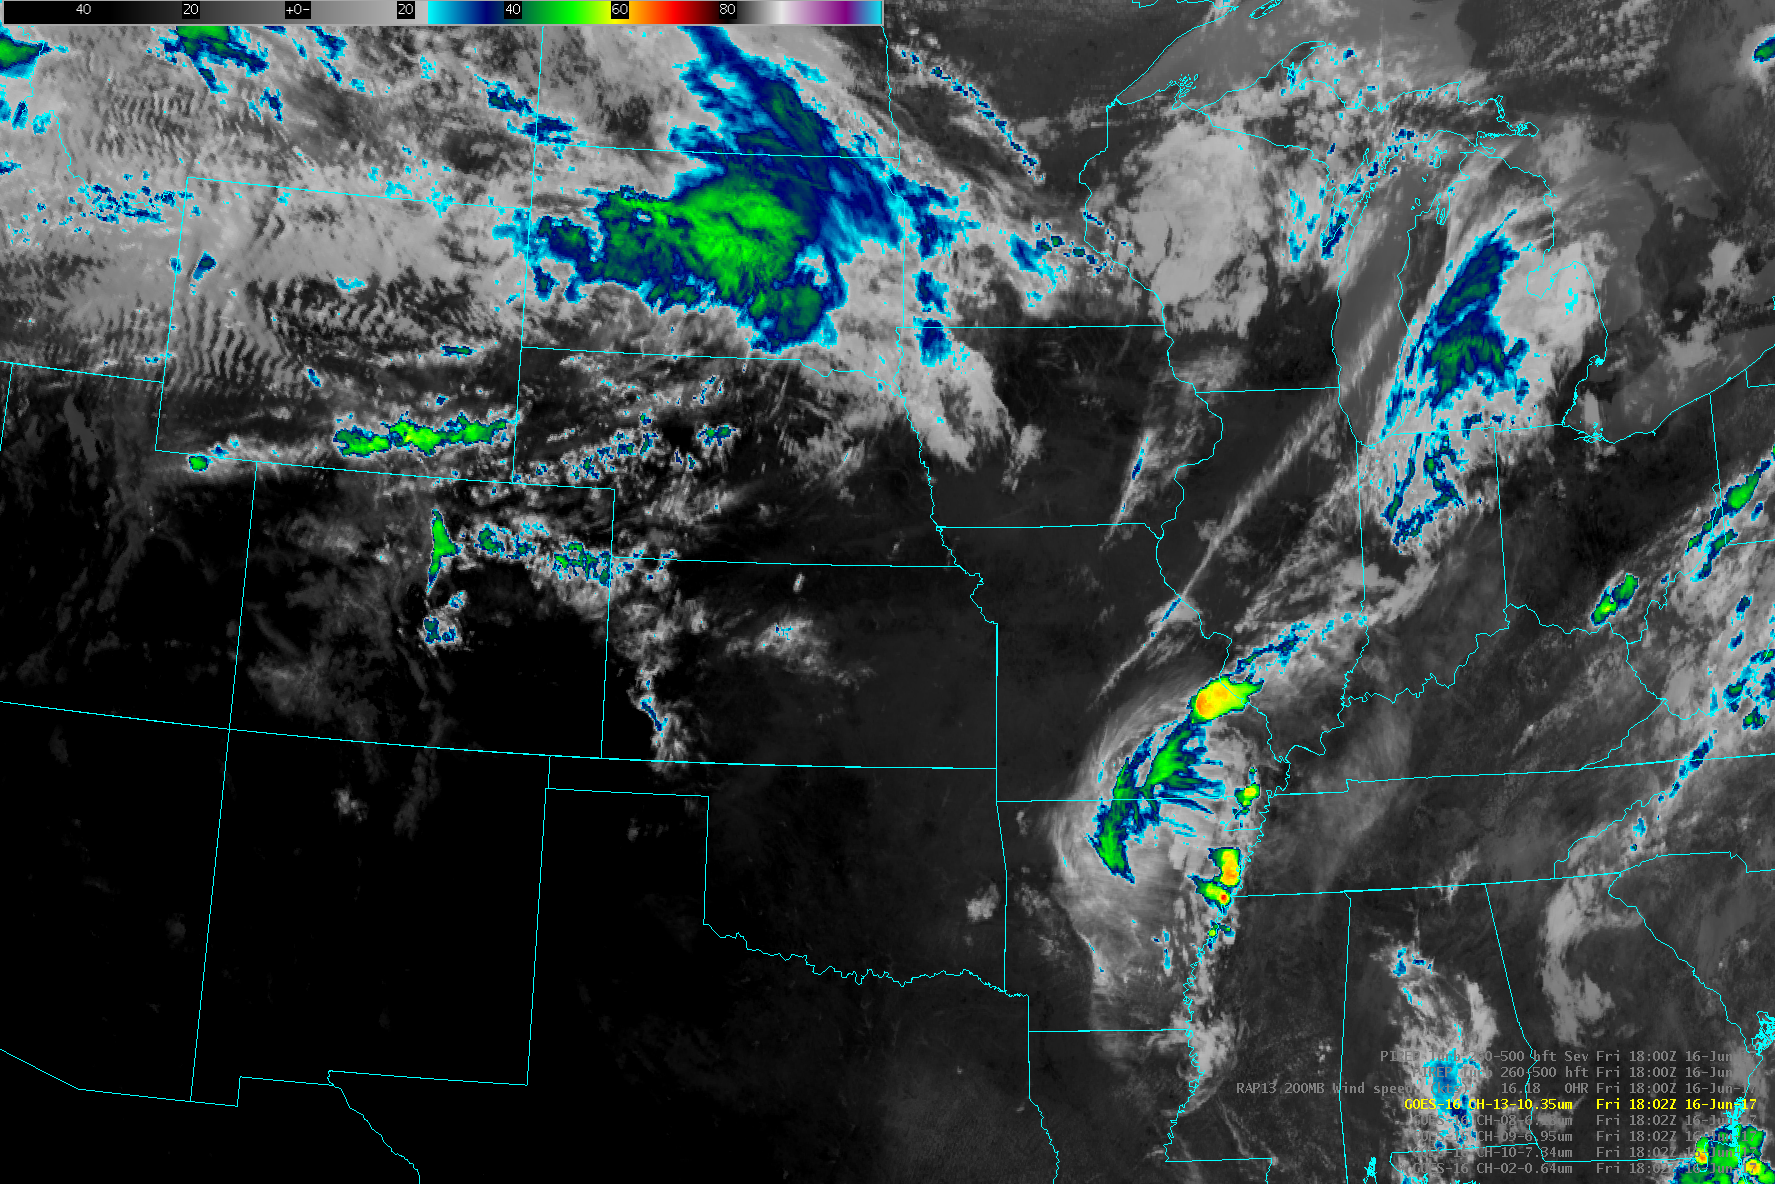 GOES-16 Clean Window [click to play animated GIF]